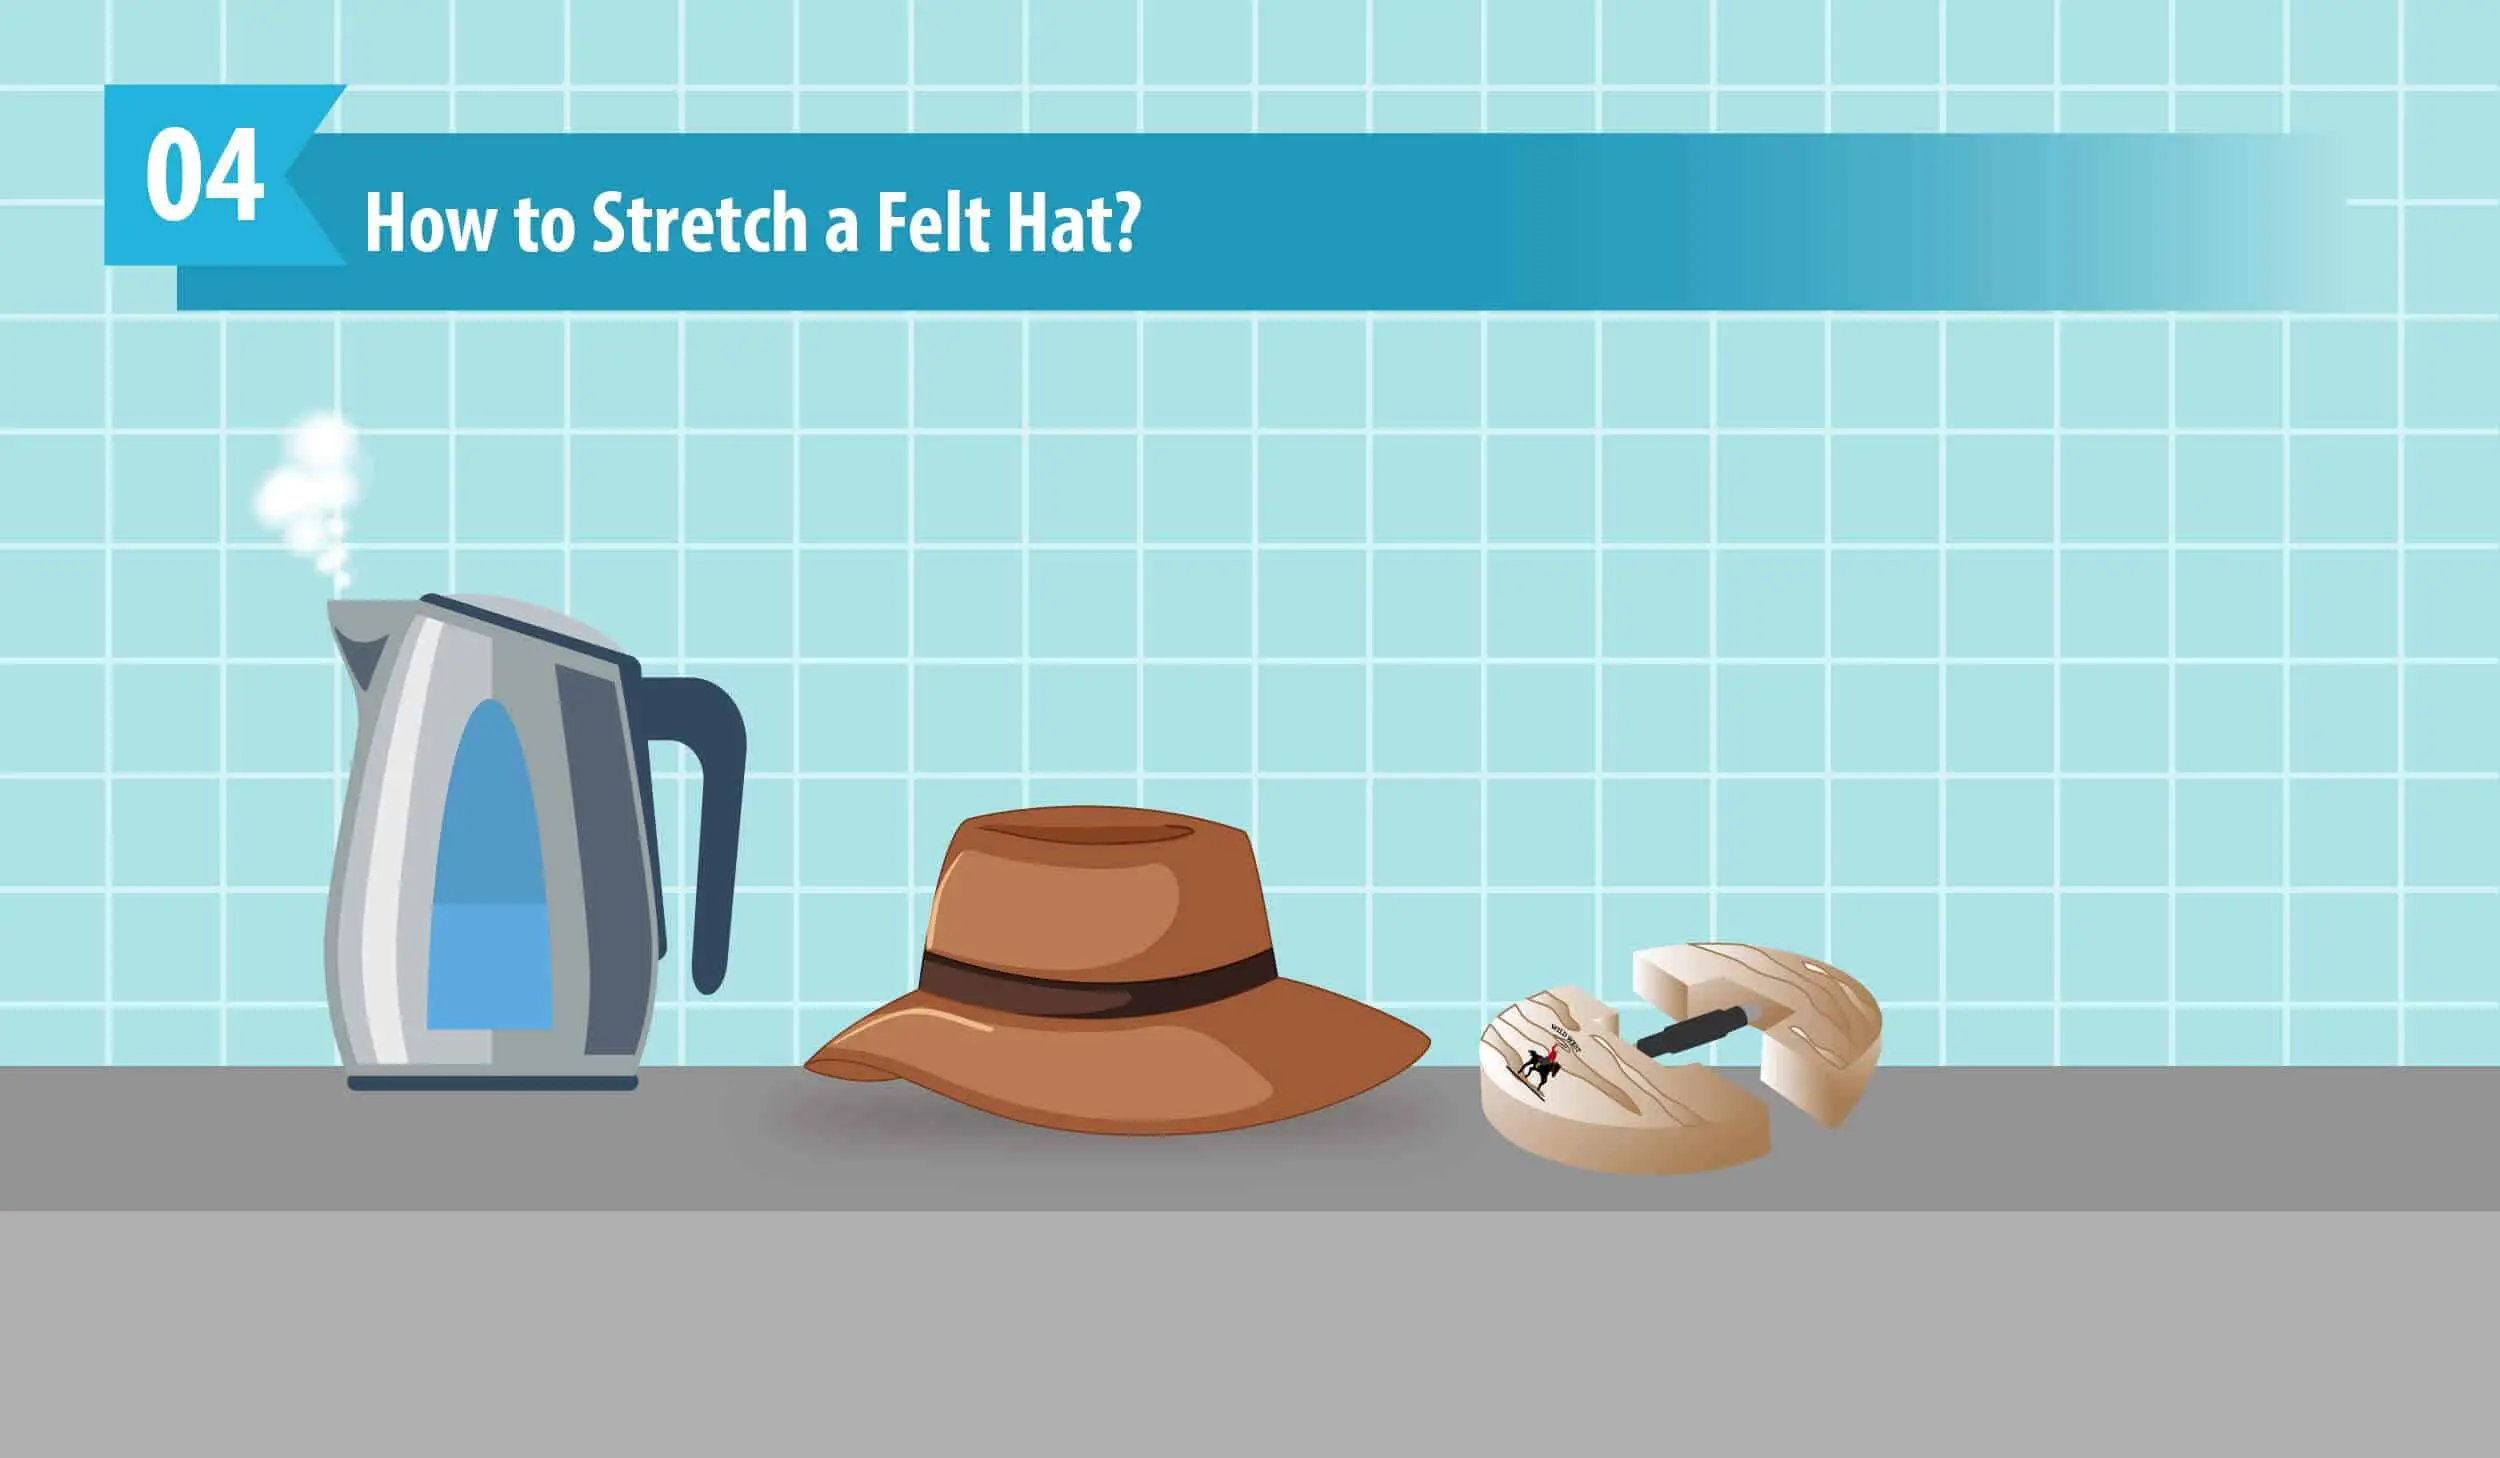 How to Stretch a Felt Hat